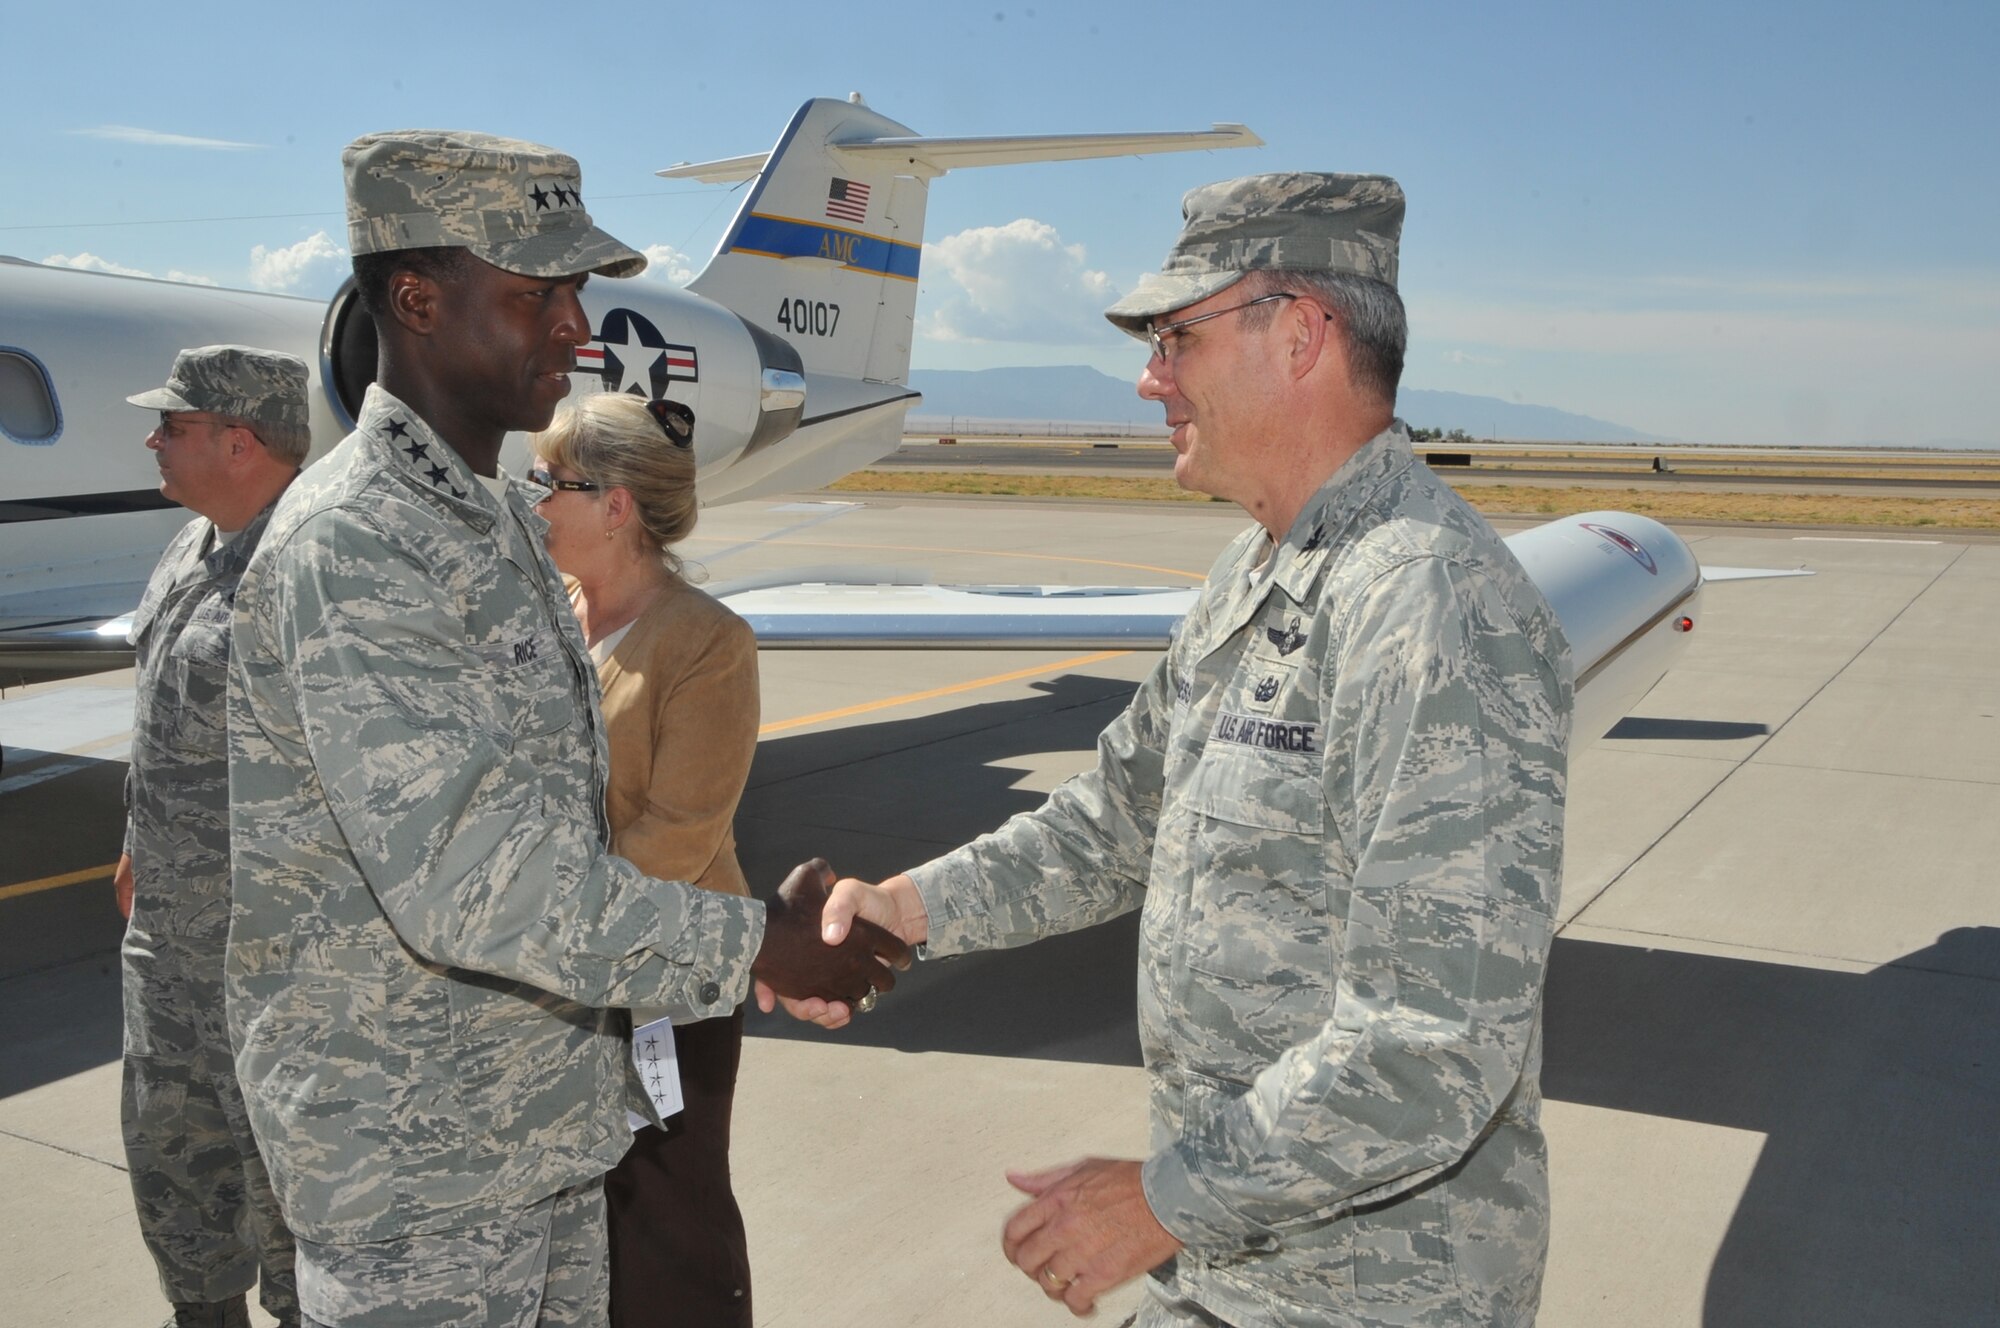 Col. Robert L. Maness, 377th Air Base Wing commander, greets Gen. Edward A. Rice Jr., Air Education and Training Command commander, on his arrival at Kirtland Air Force Base.